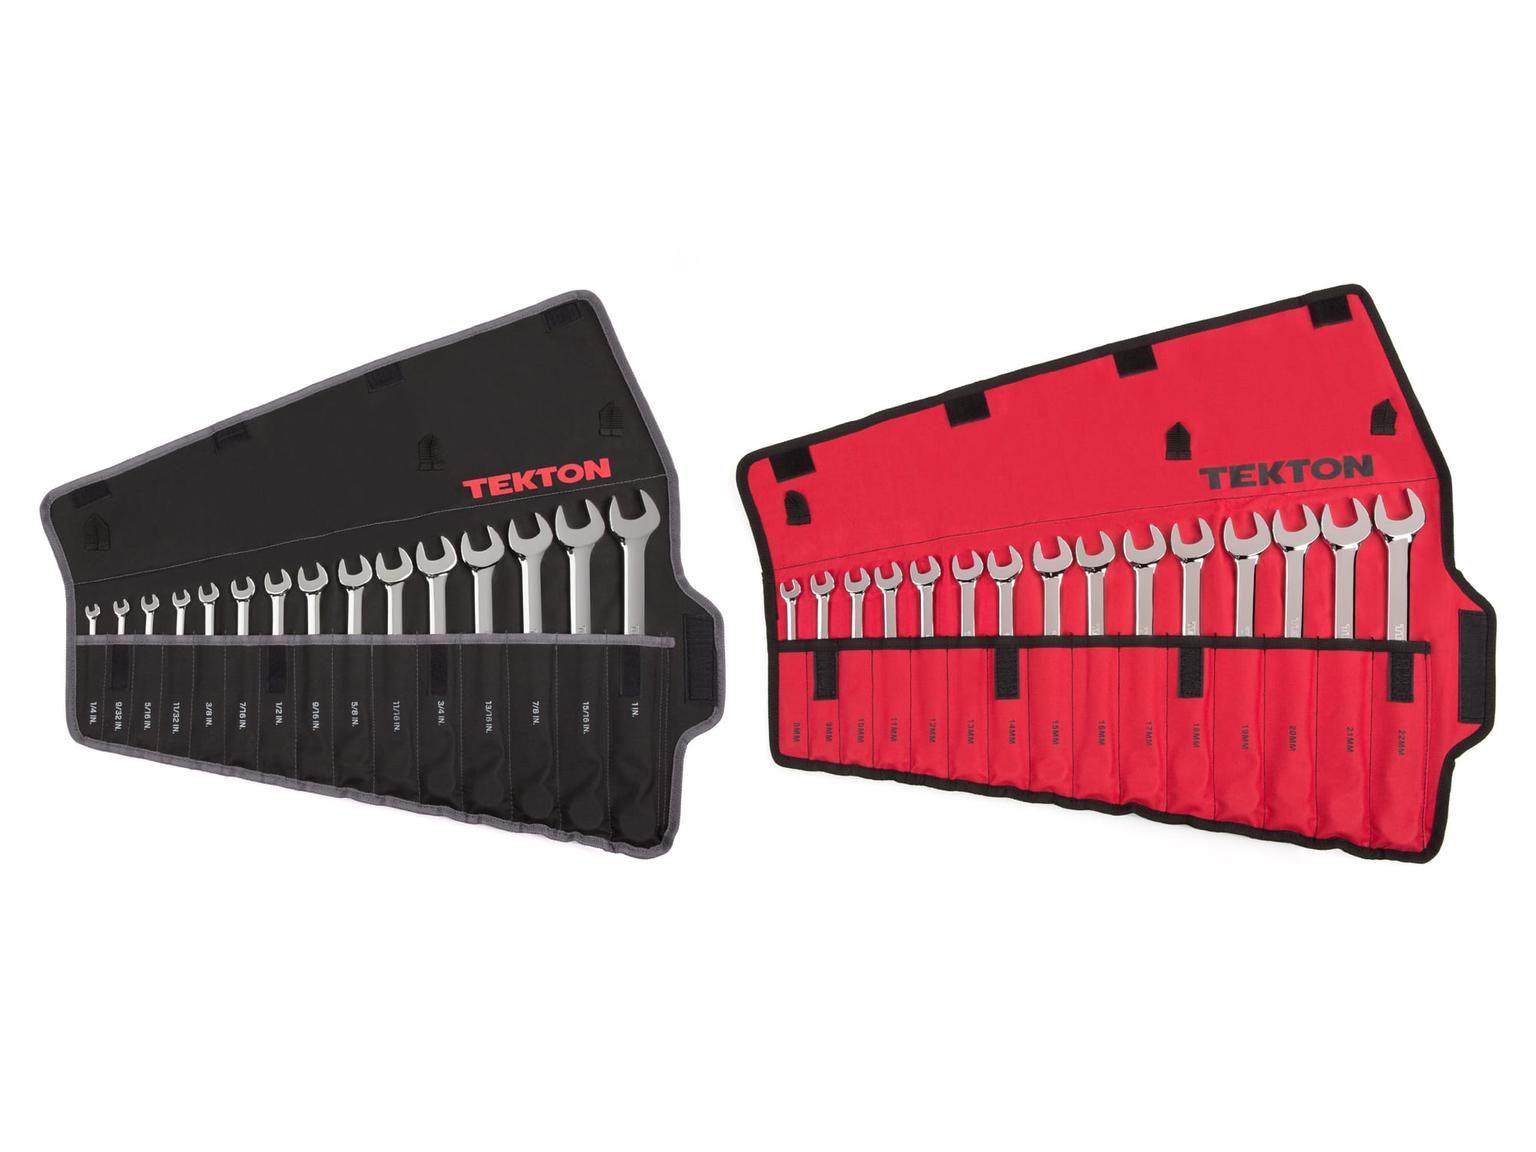 TEKTON 90192-T Combination Wrench Set with Pouch, 30-Piece (1/4 - 1 in., 8 - 22 mm)